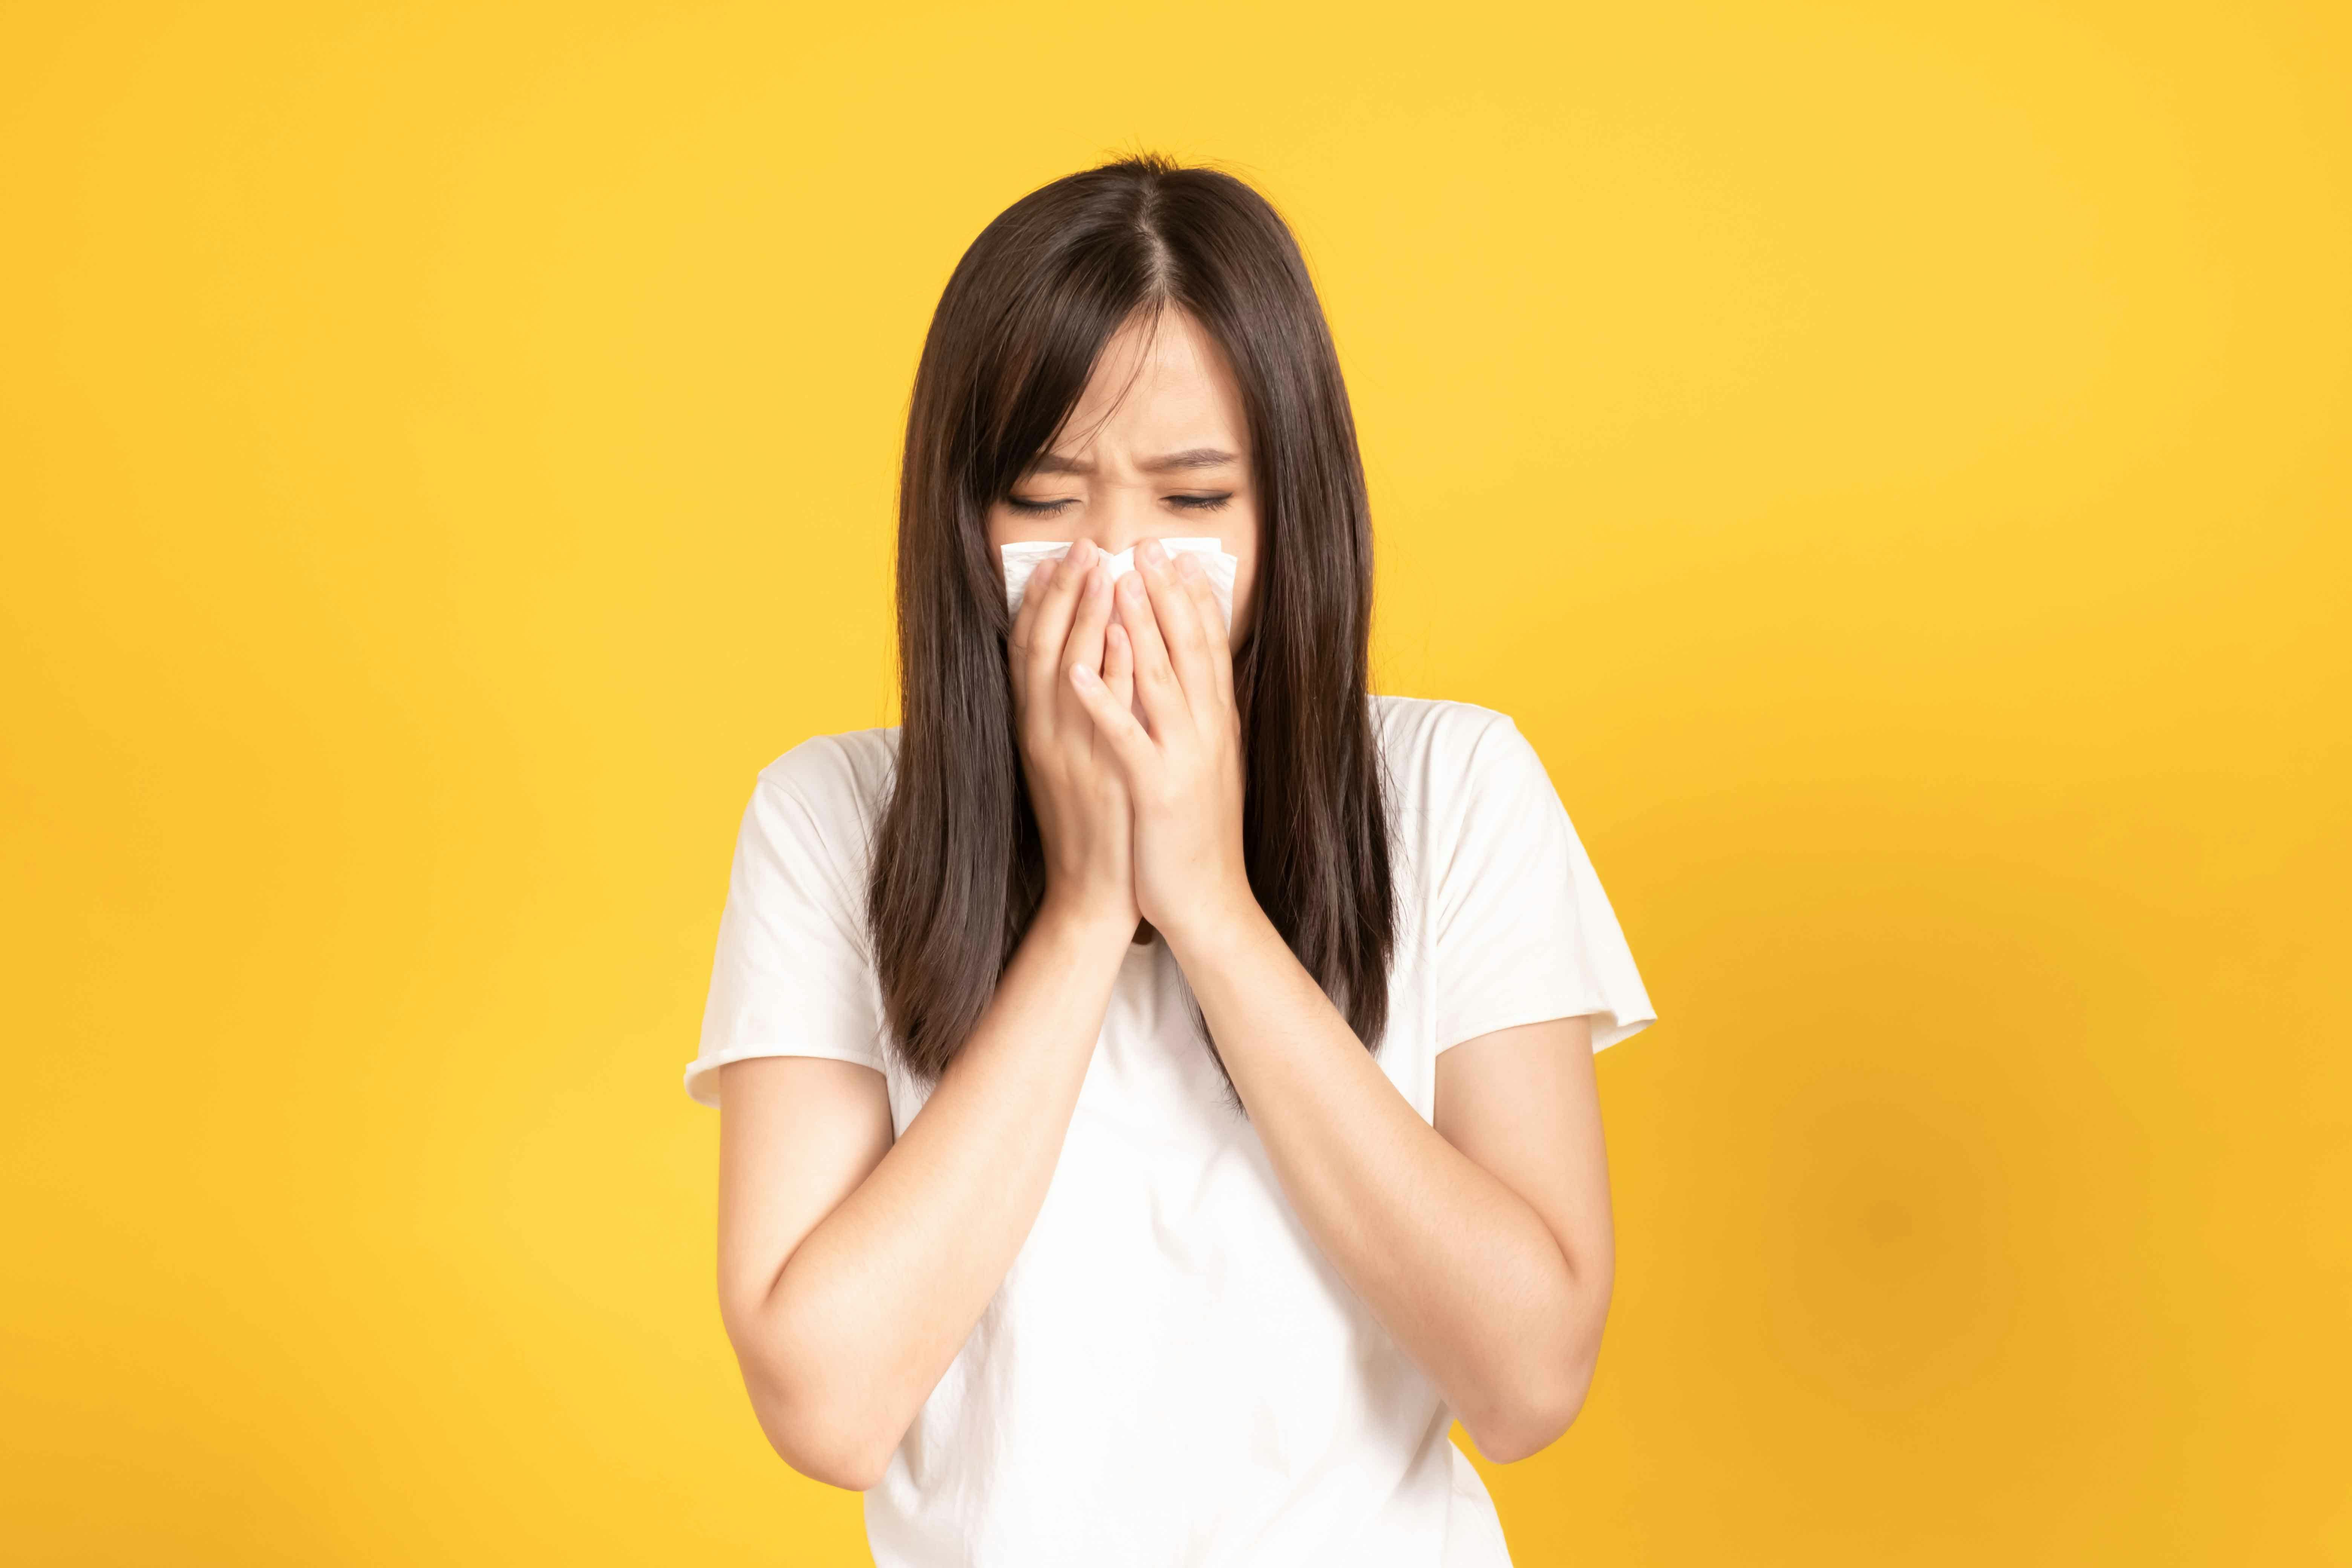 A woman sneezing with tissue in her hands